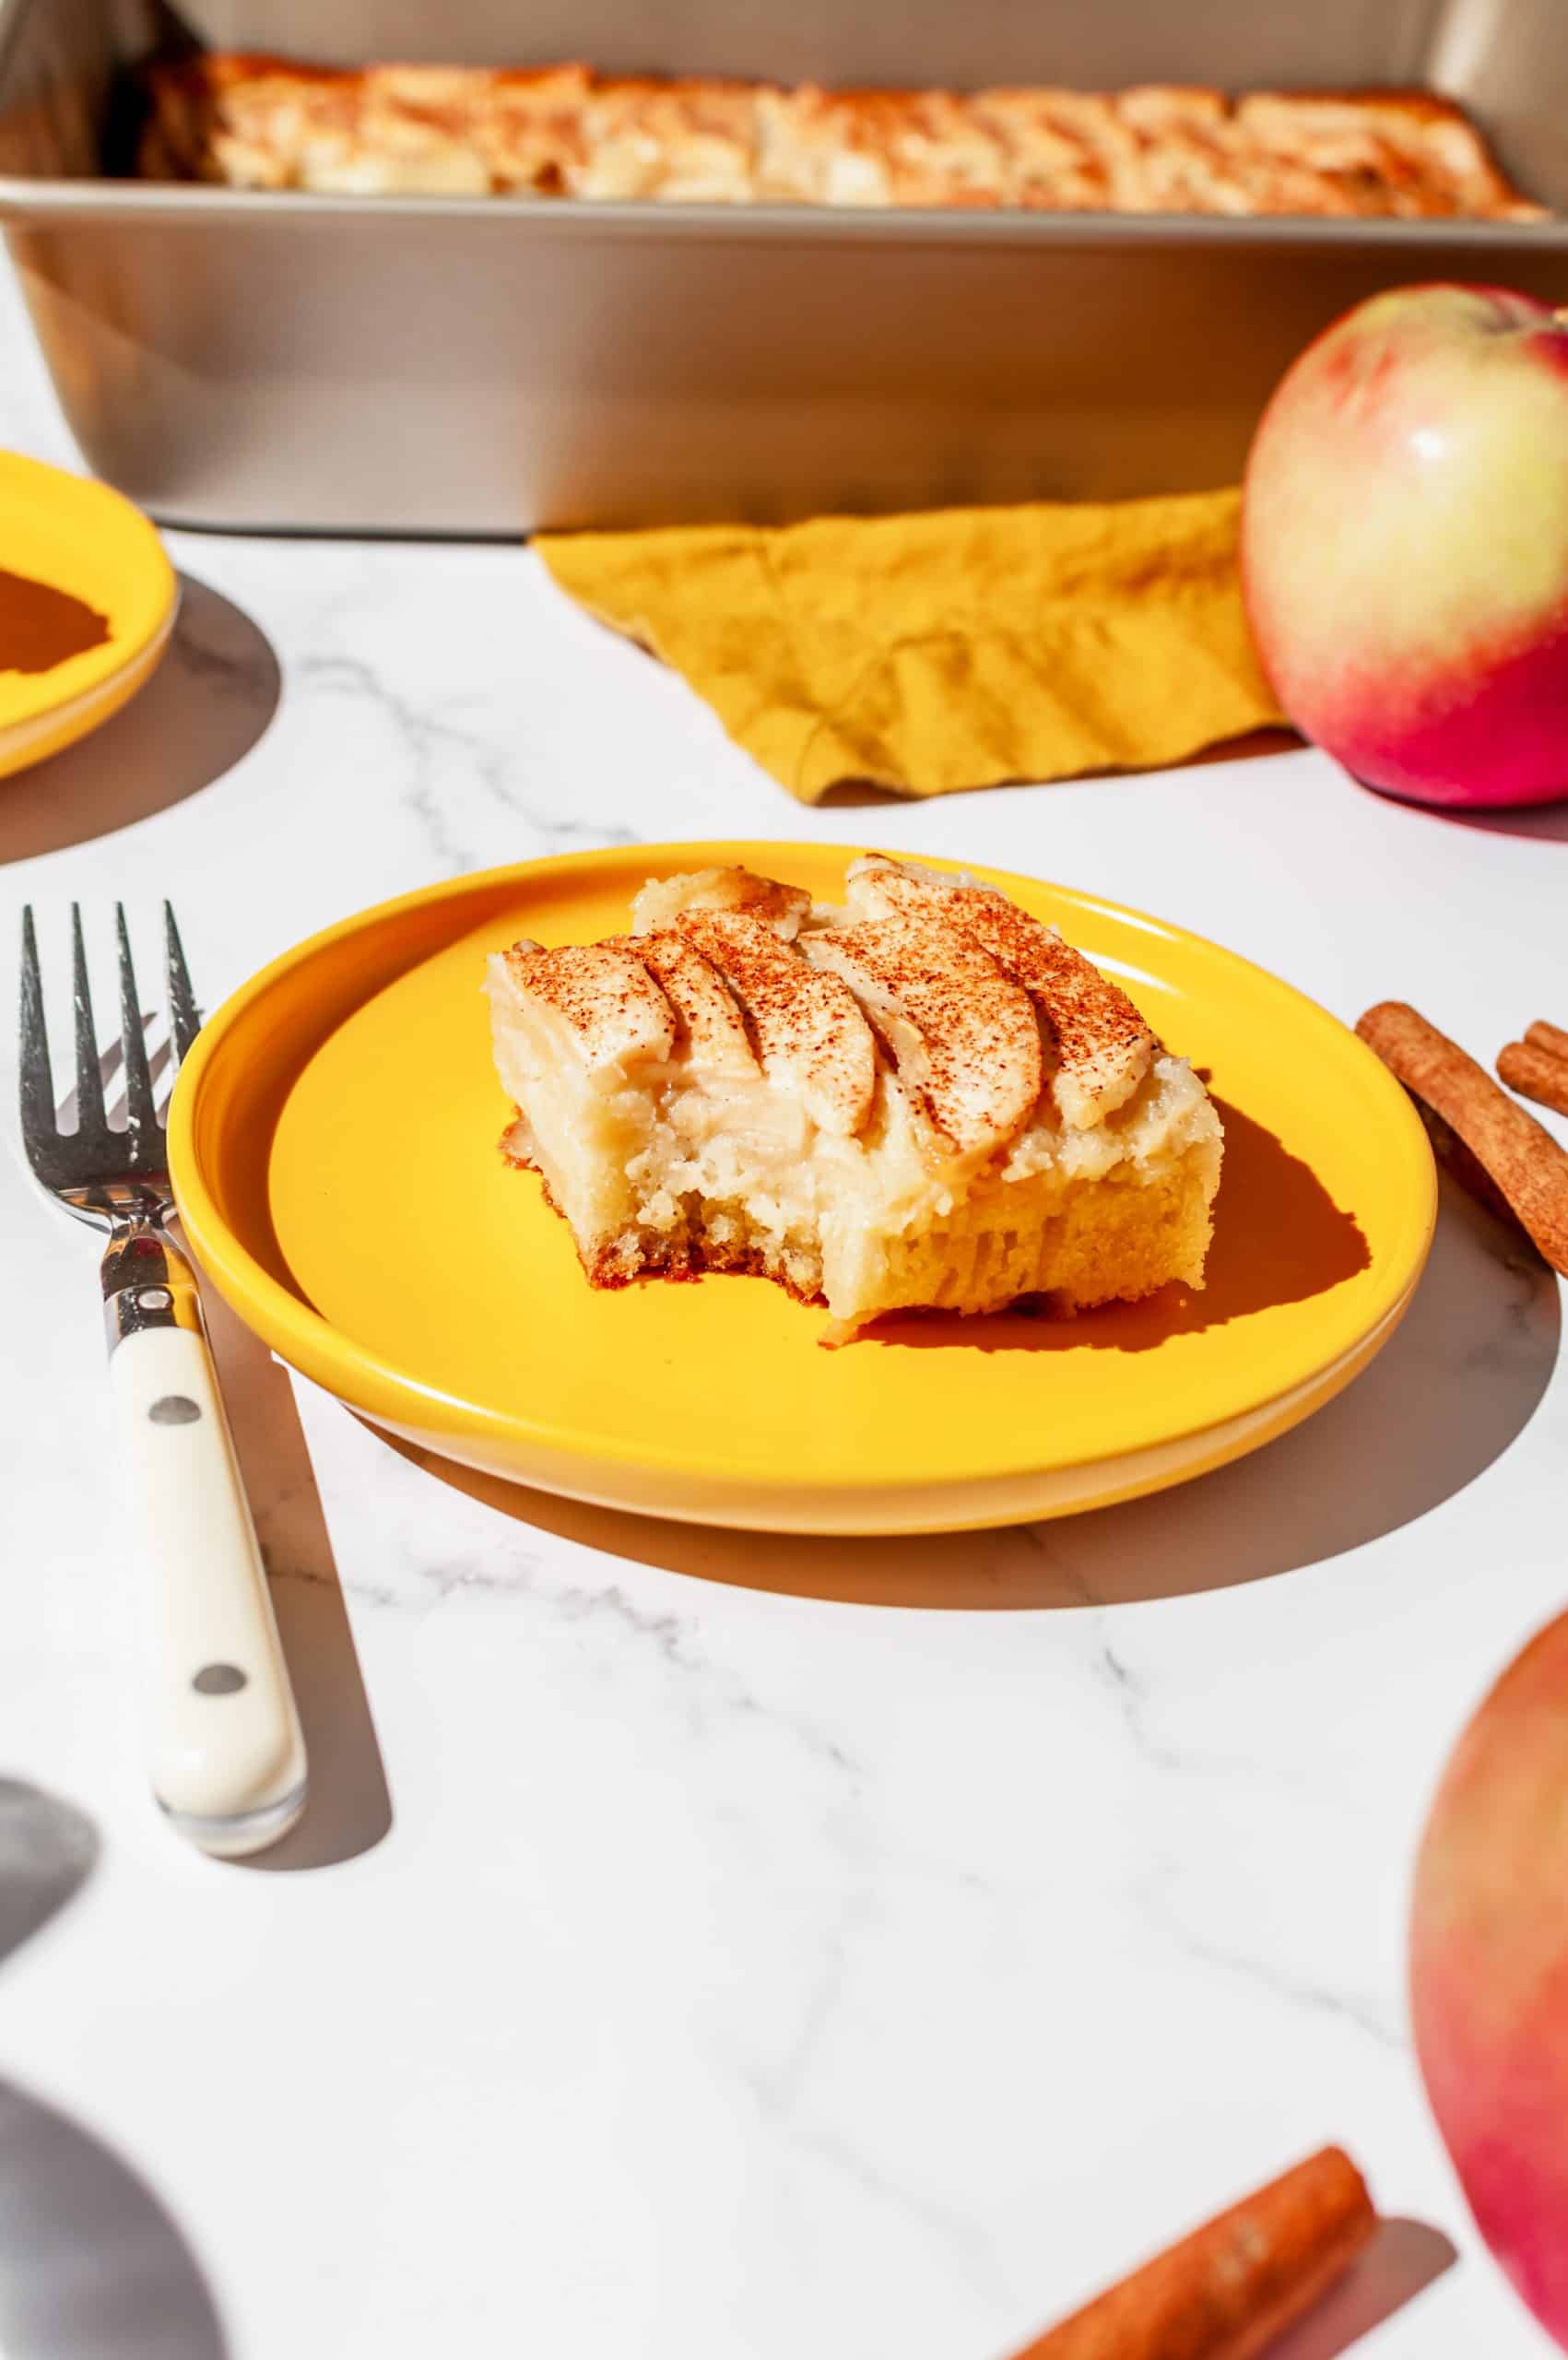 piece apple snack cake on a plate with a bite taken out, fork on the side